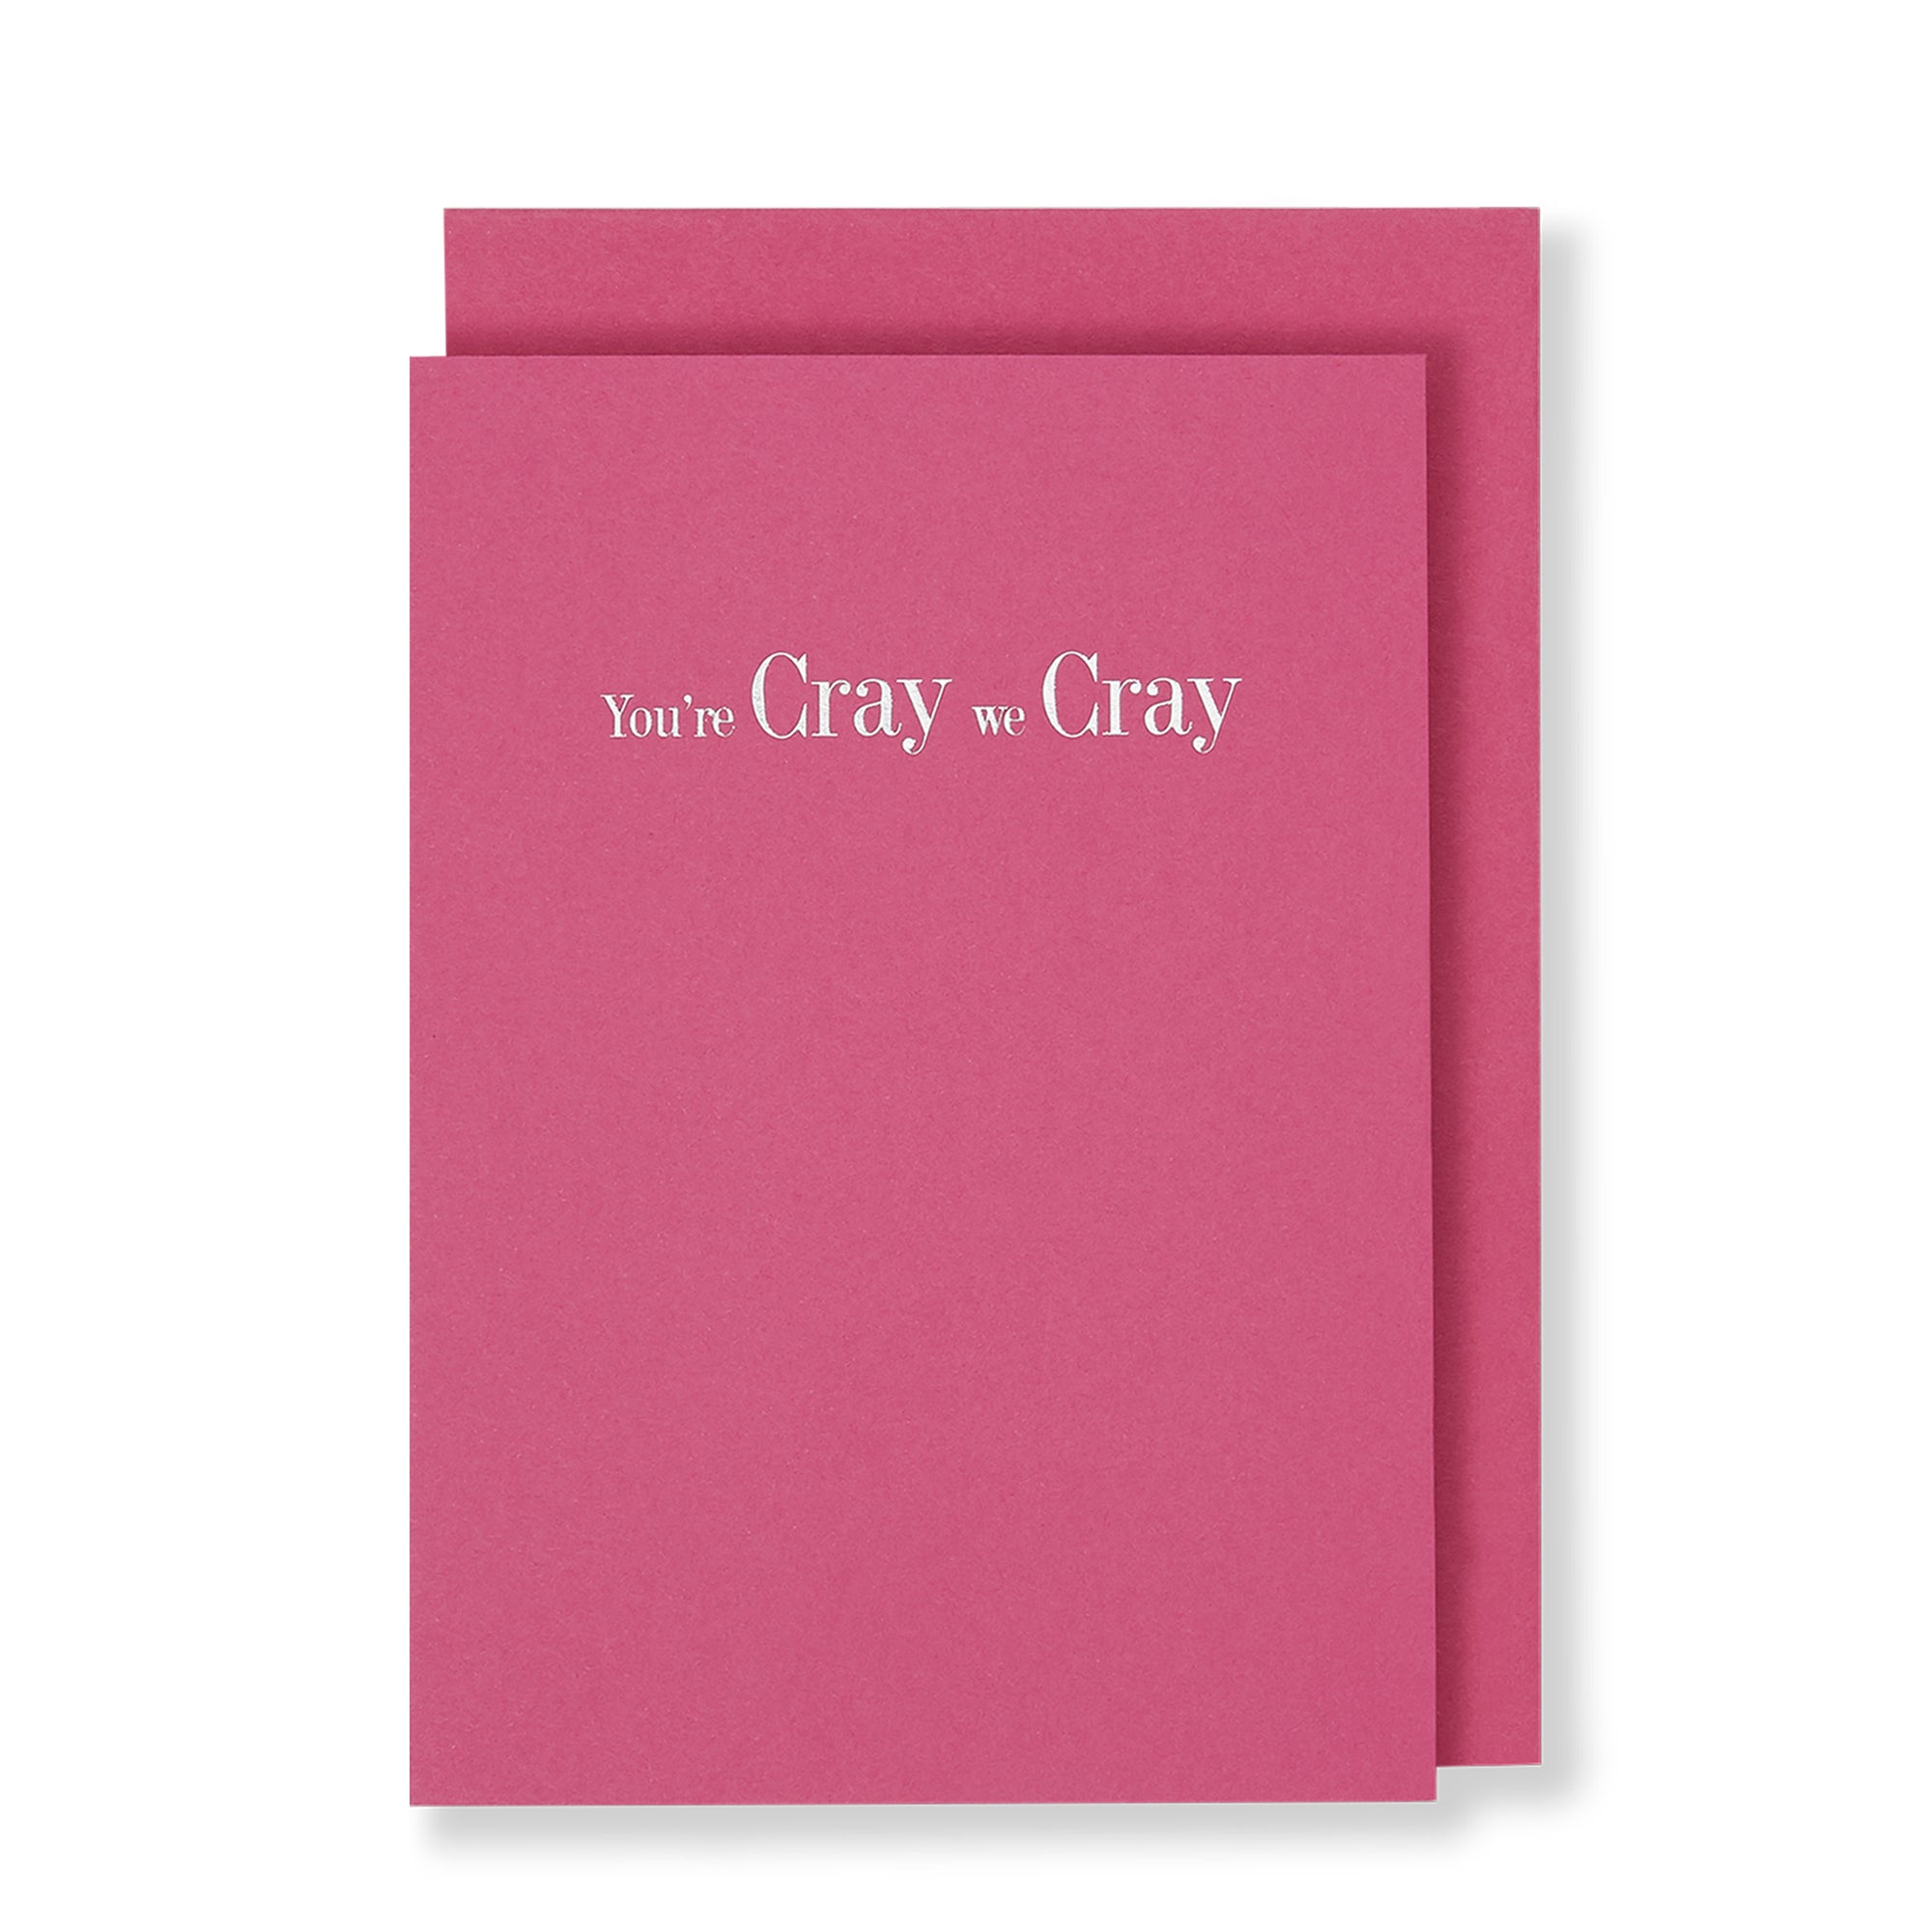 You're Cray We Cray Greeting Card in Ashy Pink, Front